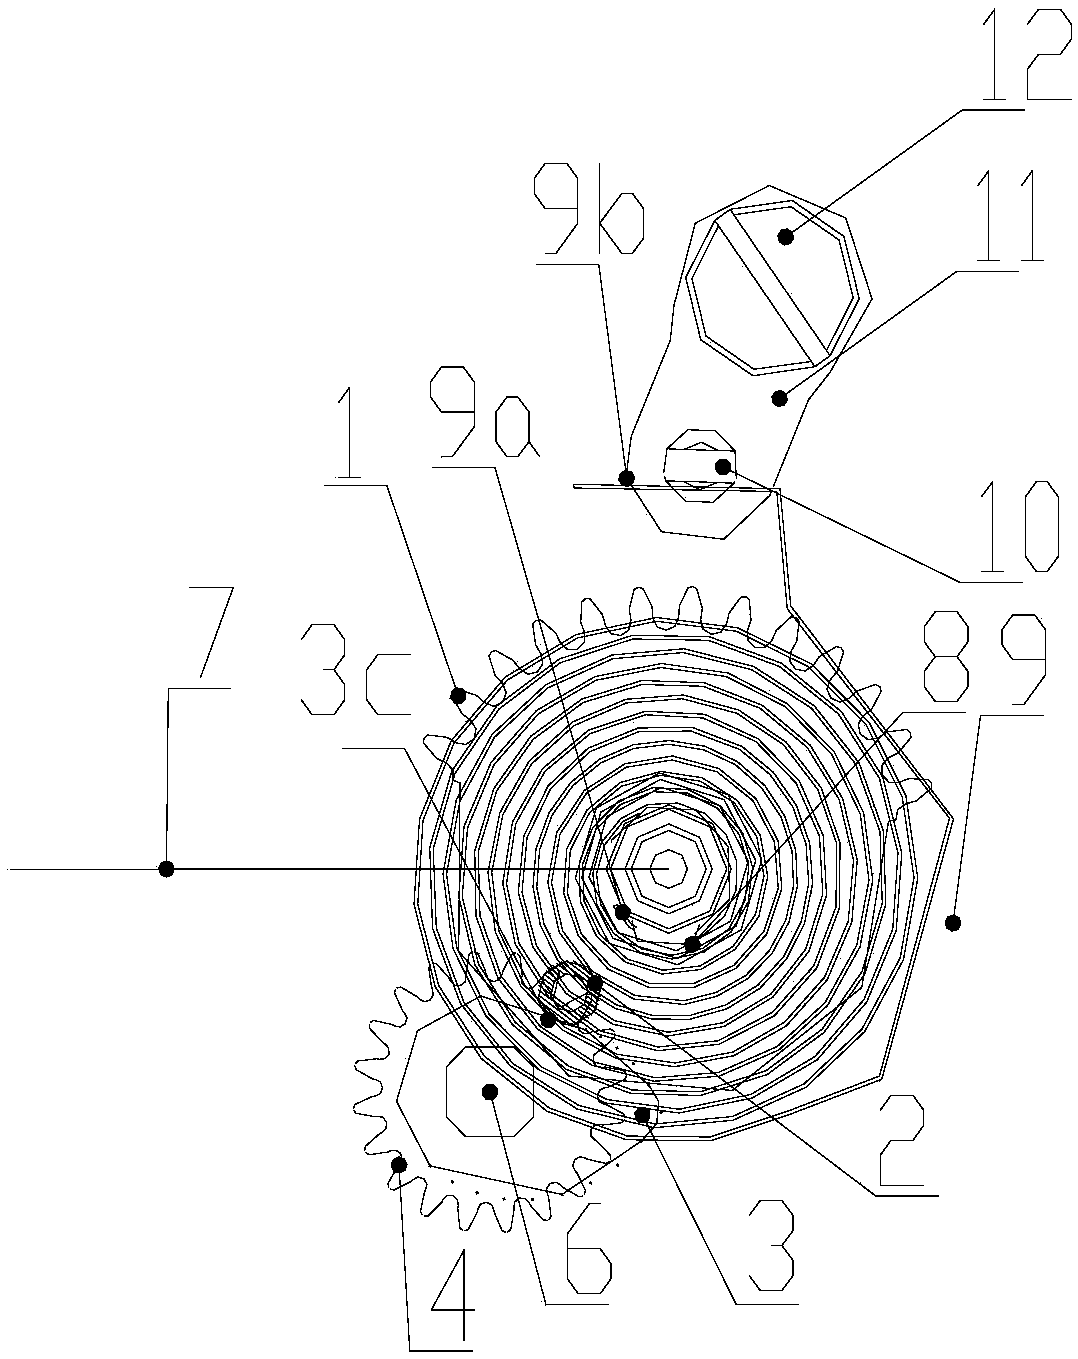 Intermittent reciprocating motion mechanism suitable for watch